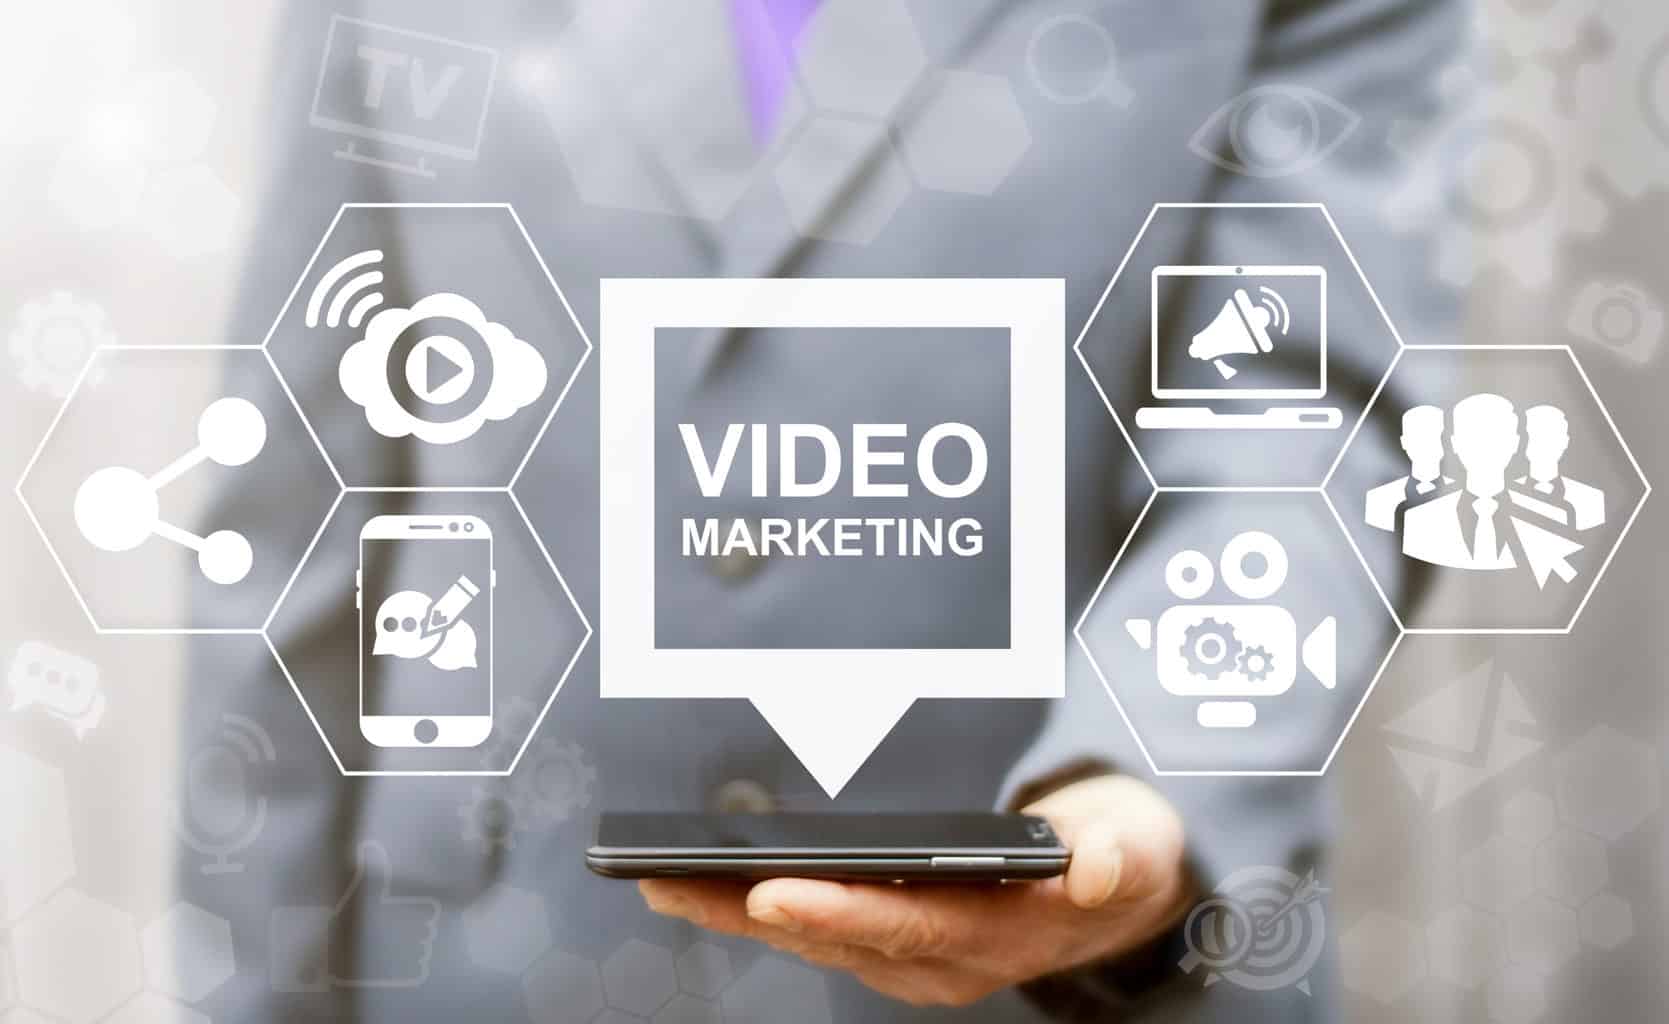 Video Marketing Online Business Mobile concept. Man offers smart phone with video marketing speech bubble icon on a virtual graphical user interface.